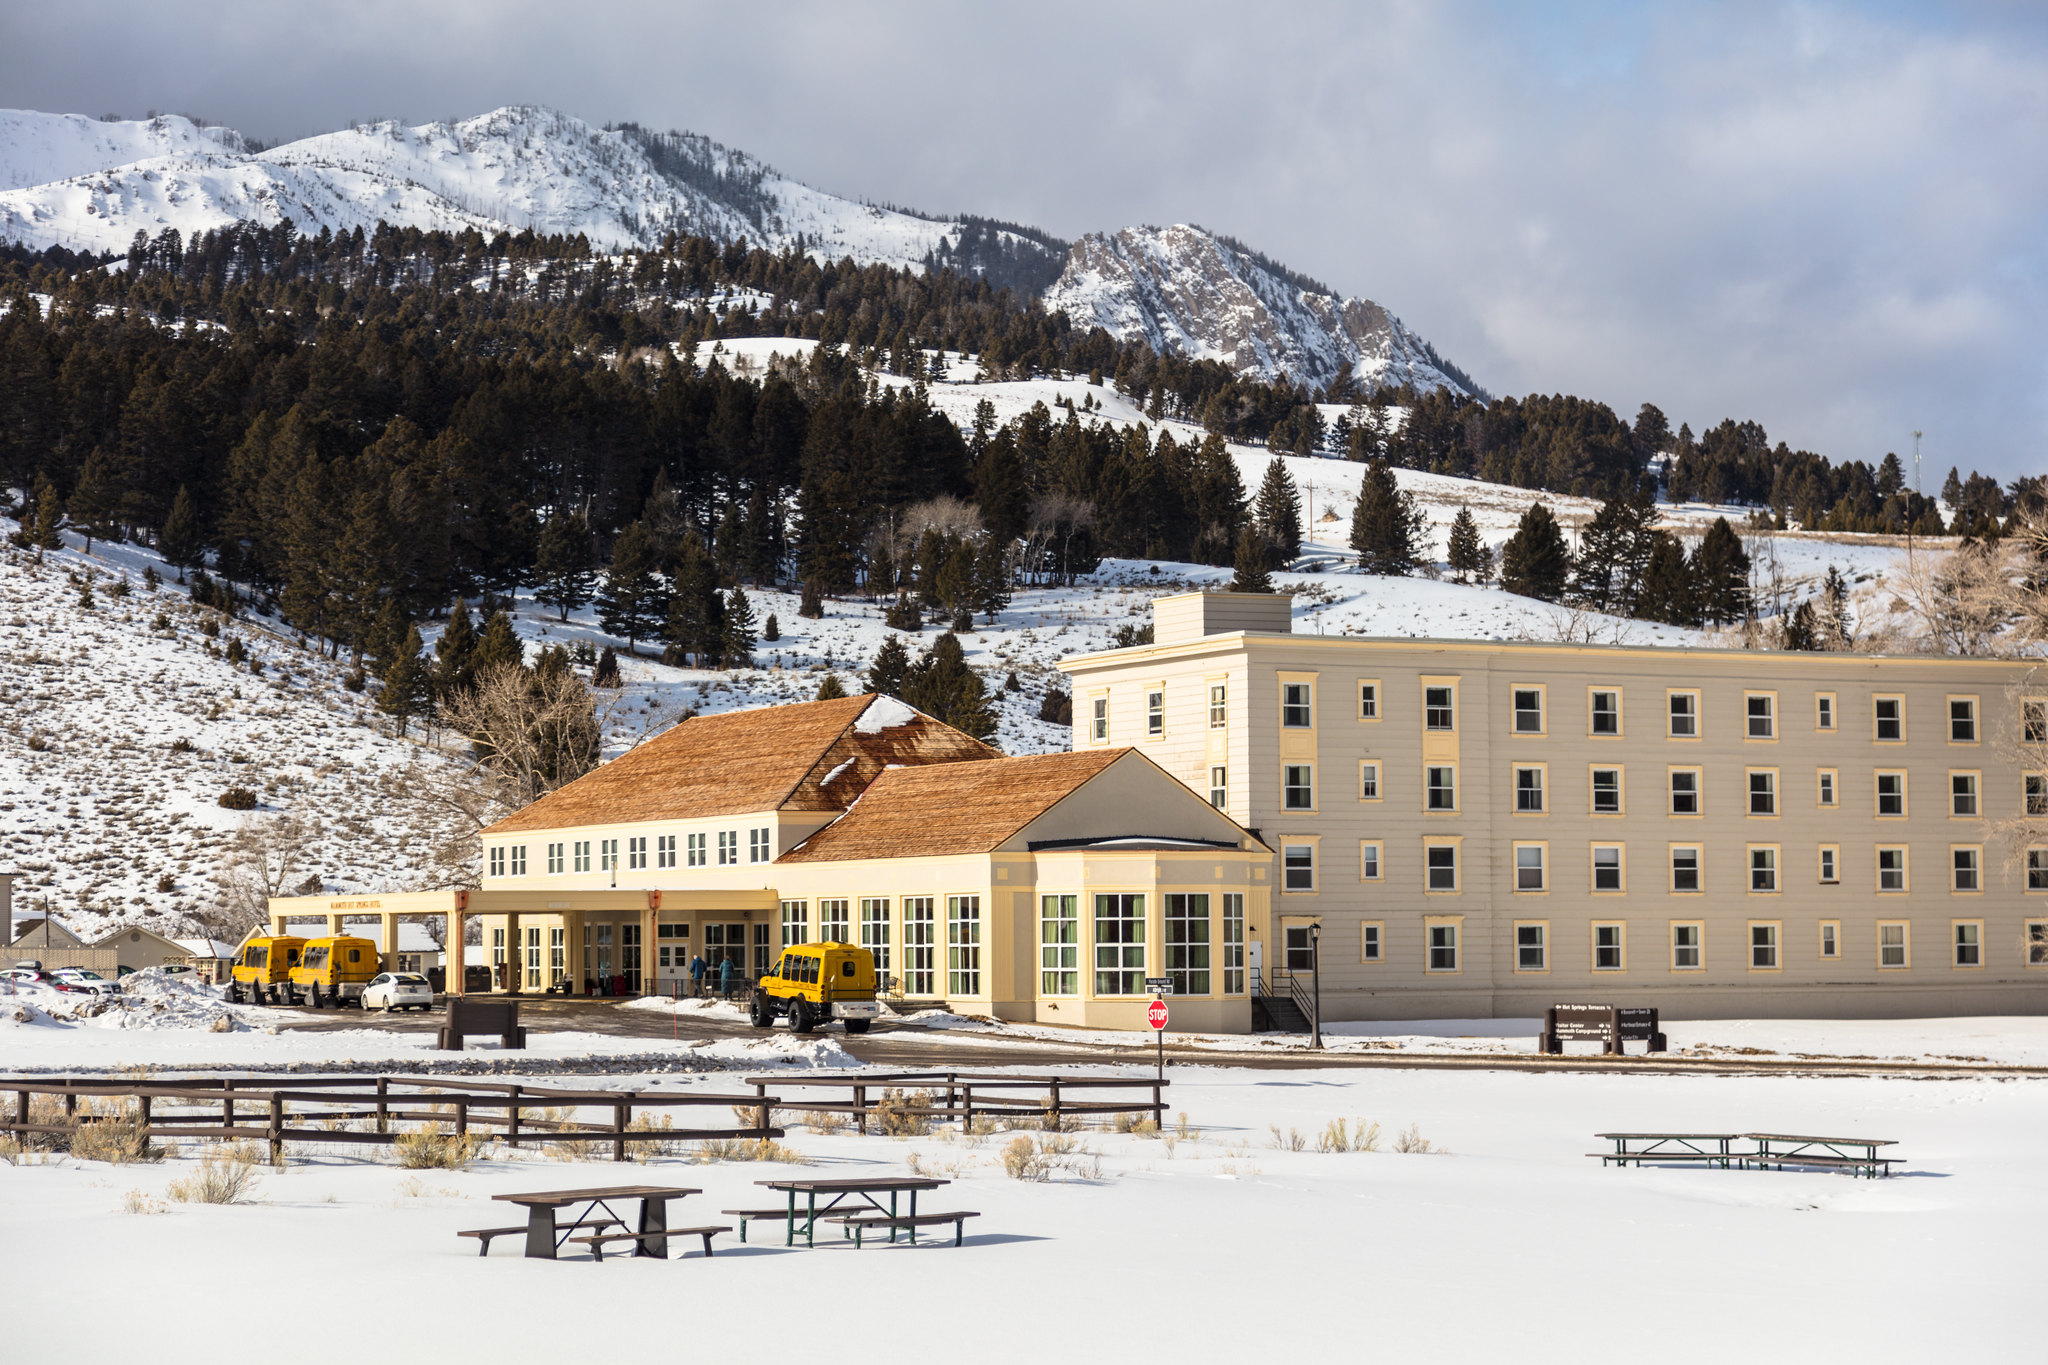 A large white hotel sits below mountains in the background. Snow covers the ground.